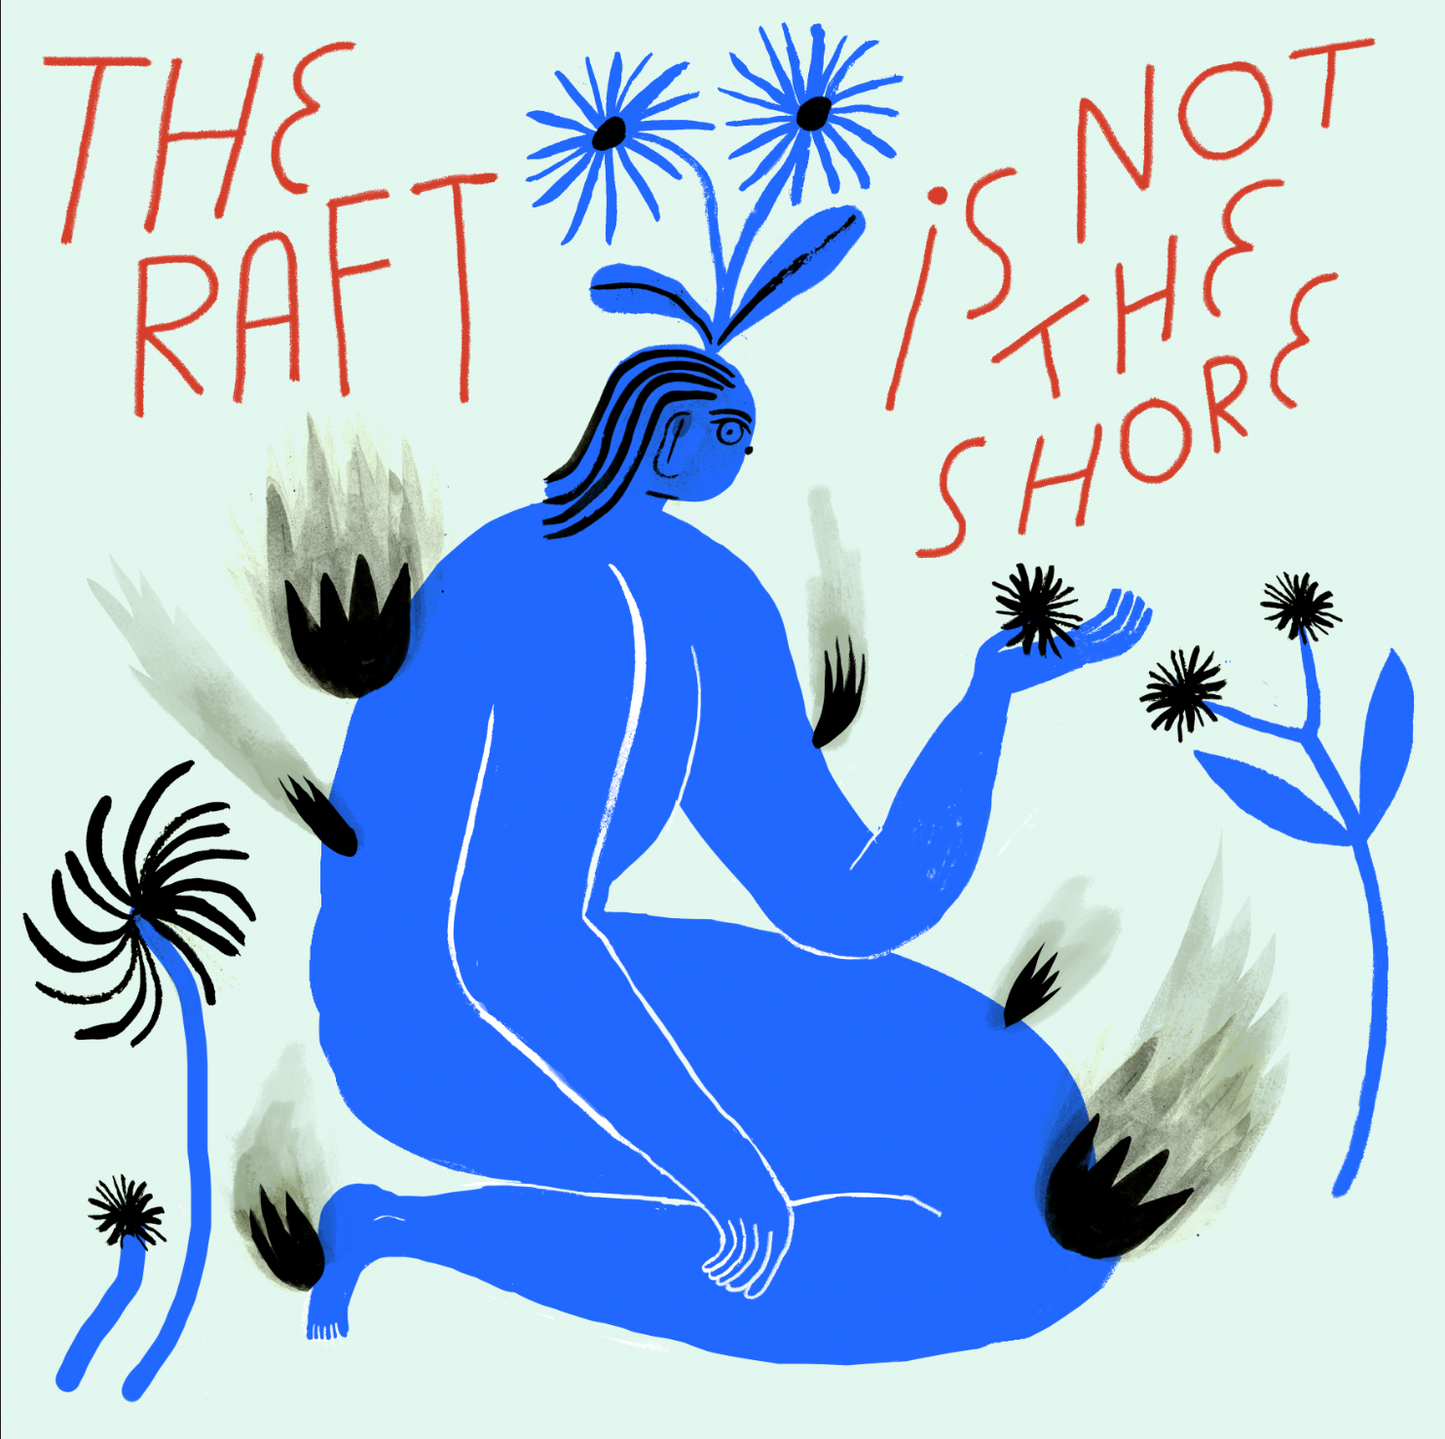 Illustrated album cover - person kneeling holding flowers, with the words The Raft Is Not The Shore floating above their head.